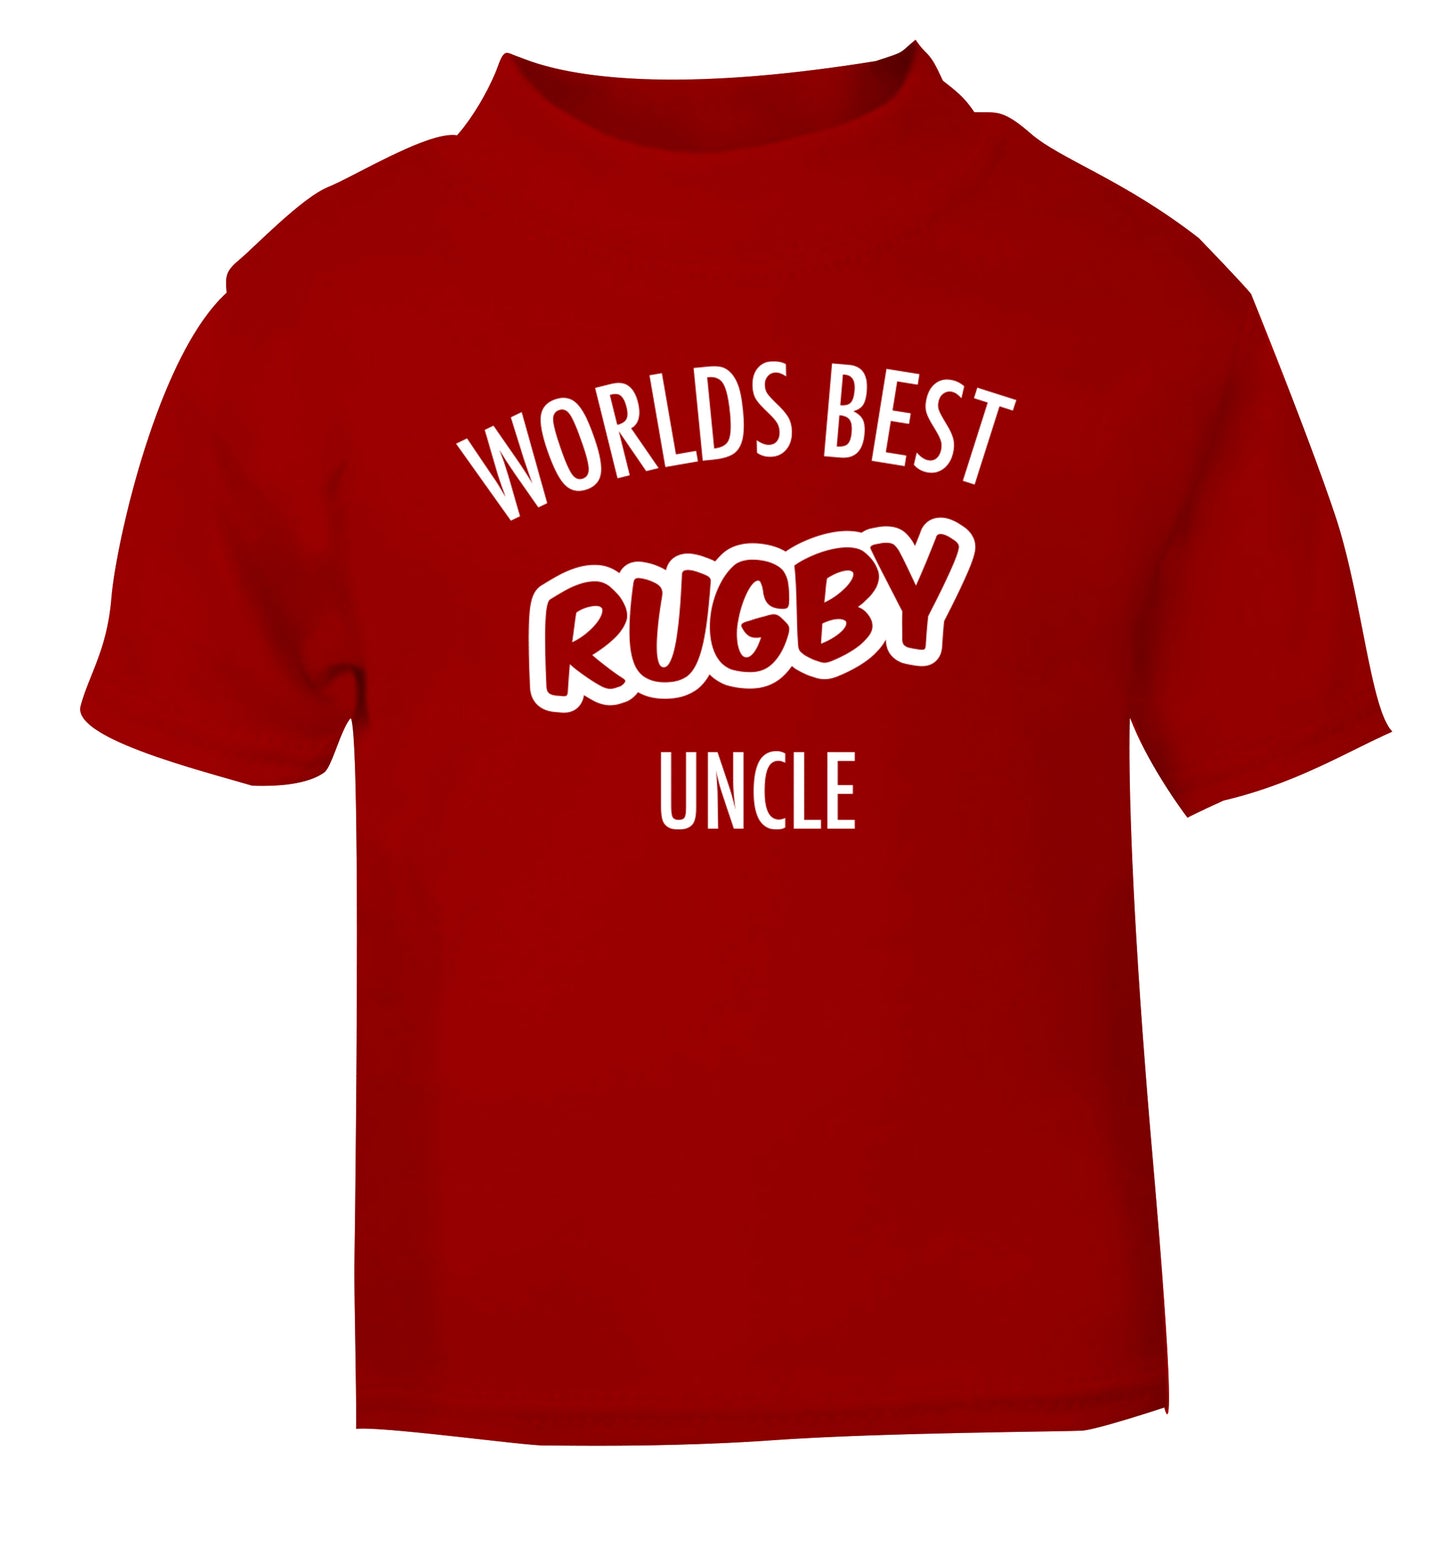 Worlds best rugby uncle red Baby Toddler Tshirt 2 Years